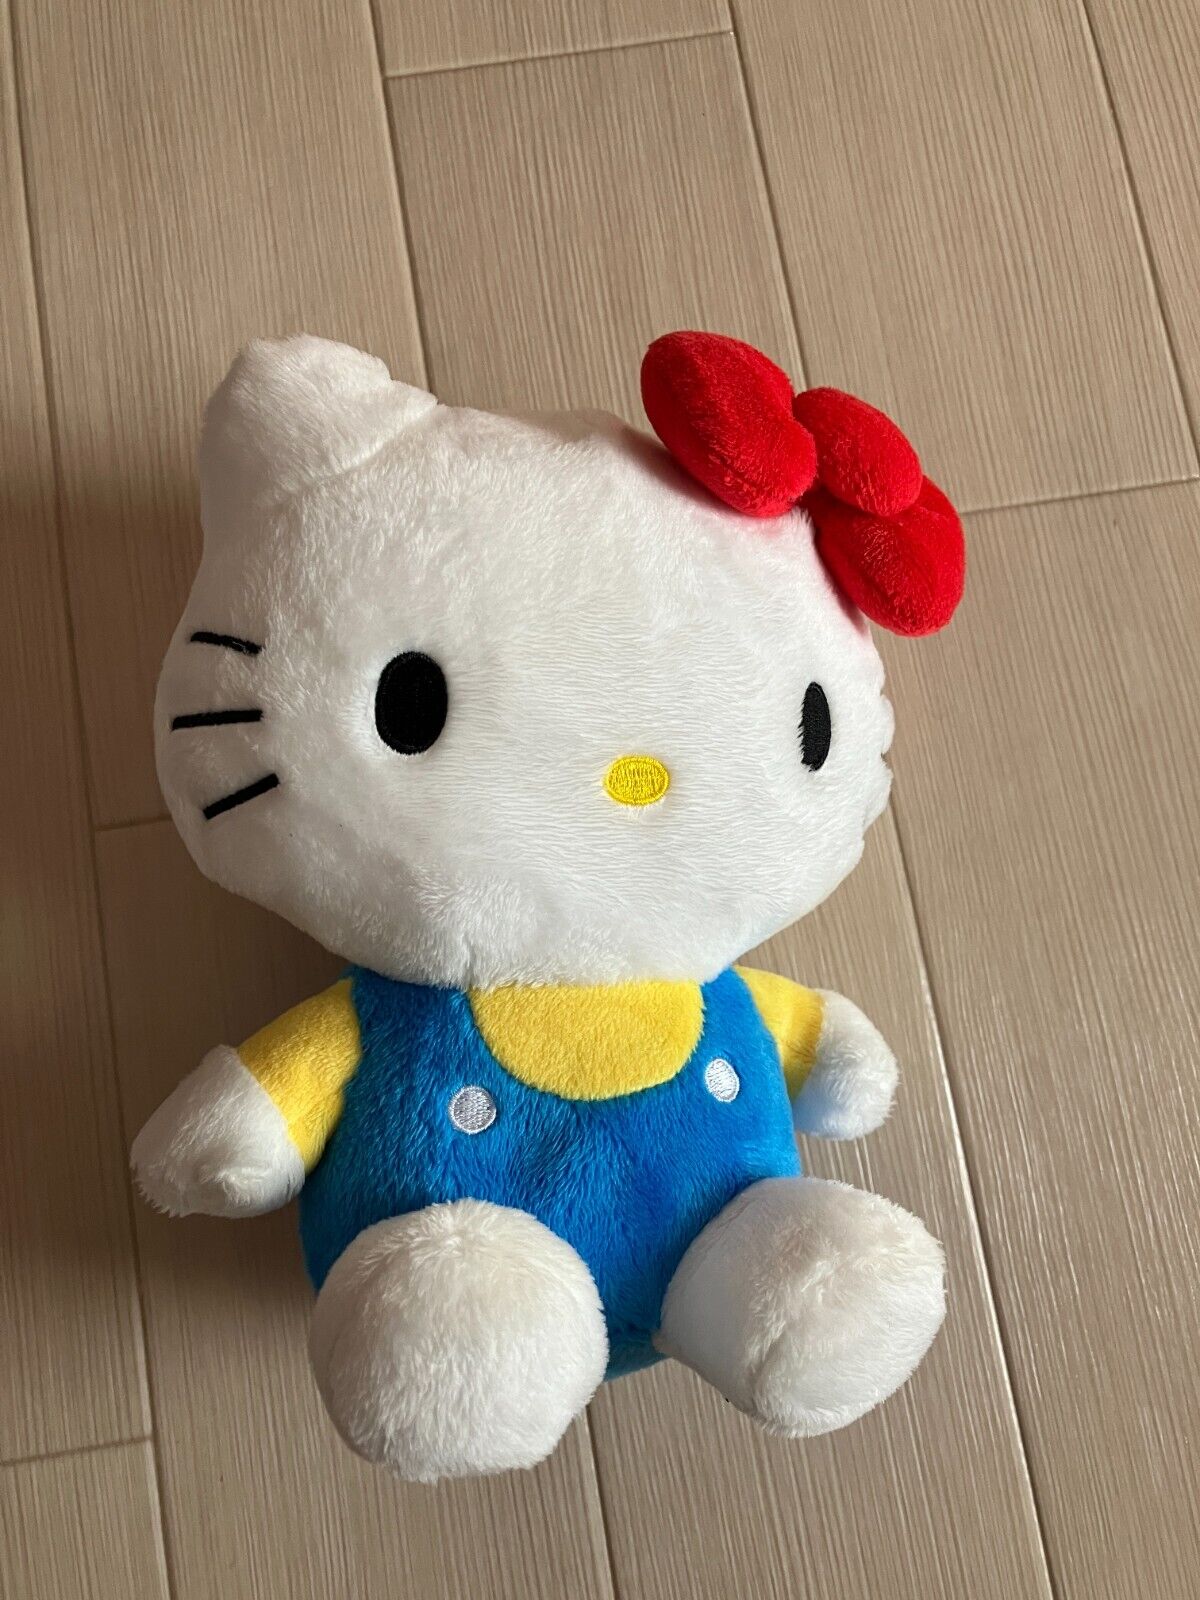 Sanrio Hello Kitty Plush Doll  Japan New about 21cm/8.3in